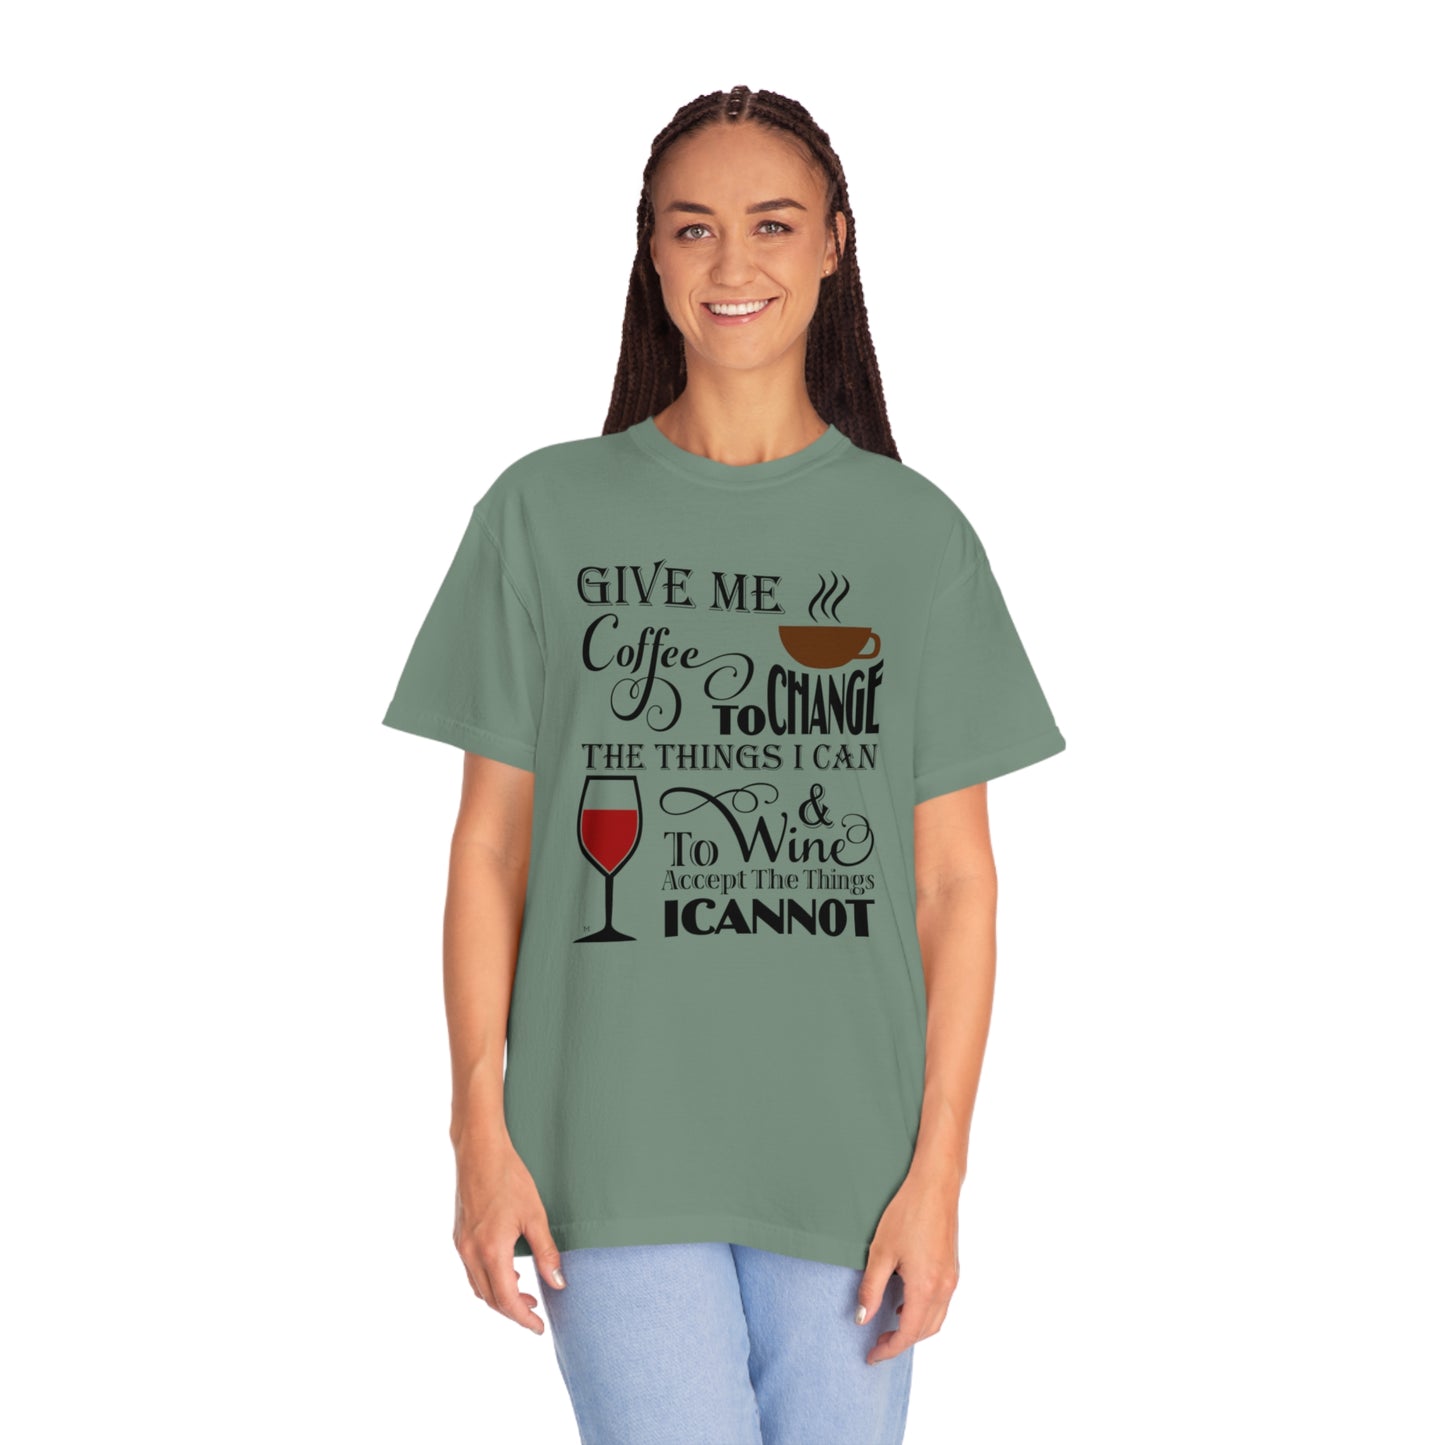 Give Me Coffee To Accept The Things I Can and Wine To Accept The Things I Cannot Unisex Garment-Dyed Comfort Colors T-shirt by MII Designs